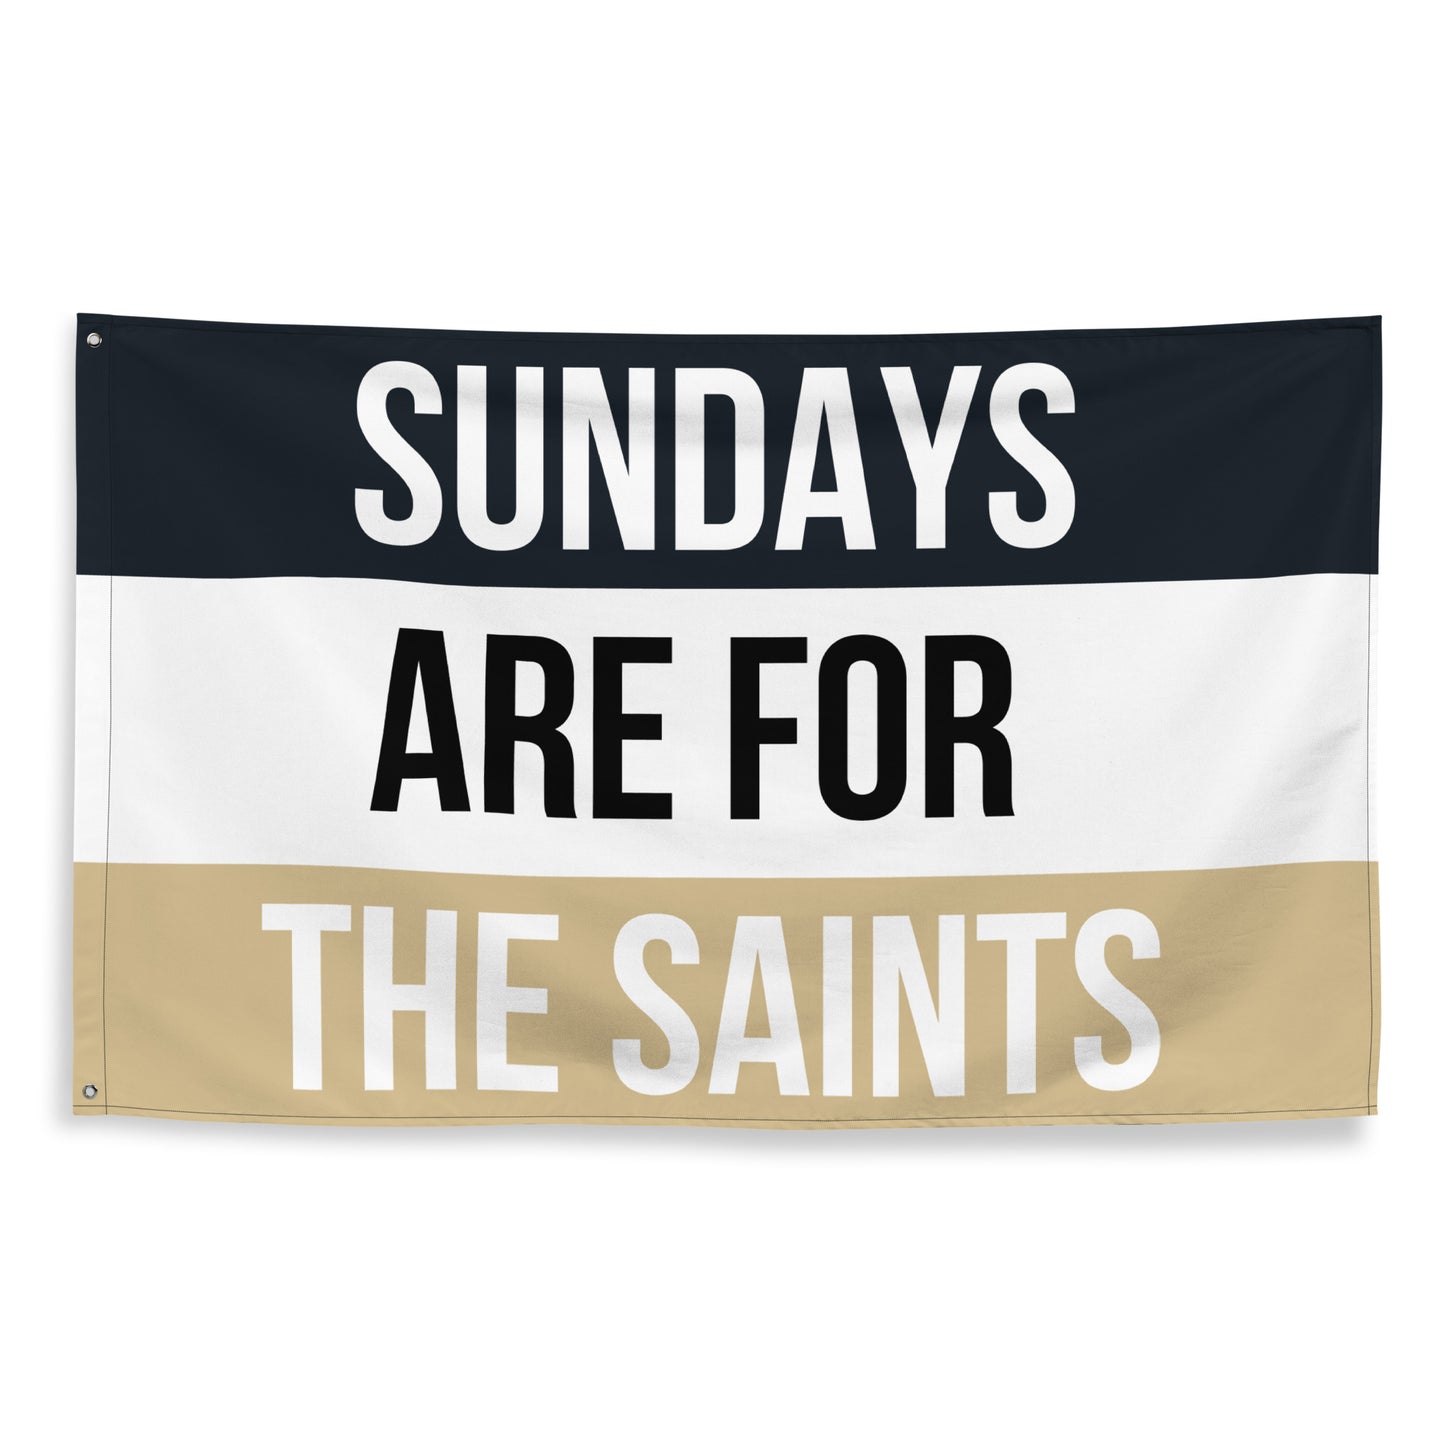 Sundays are for the Steelers Flag,  Pittsburgh Steelers Flag, Football Tailgate Flag